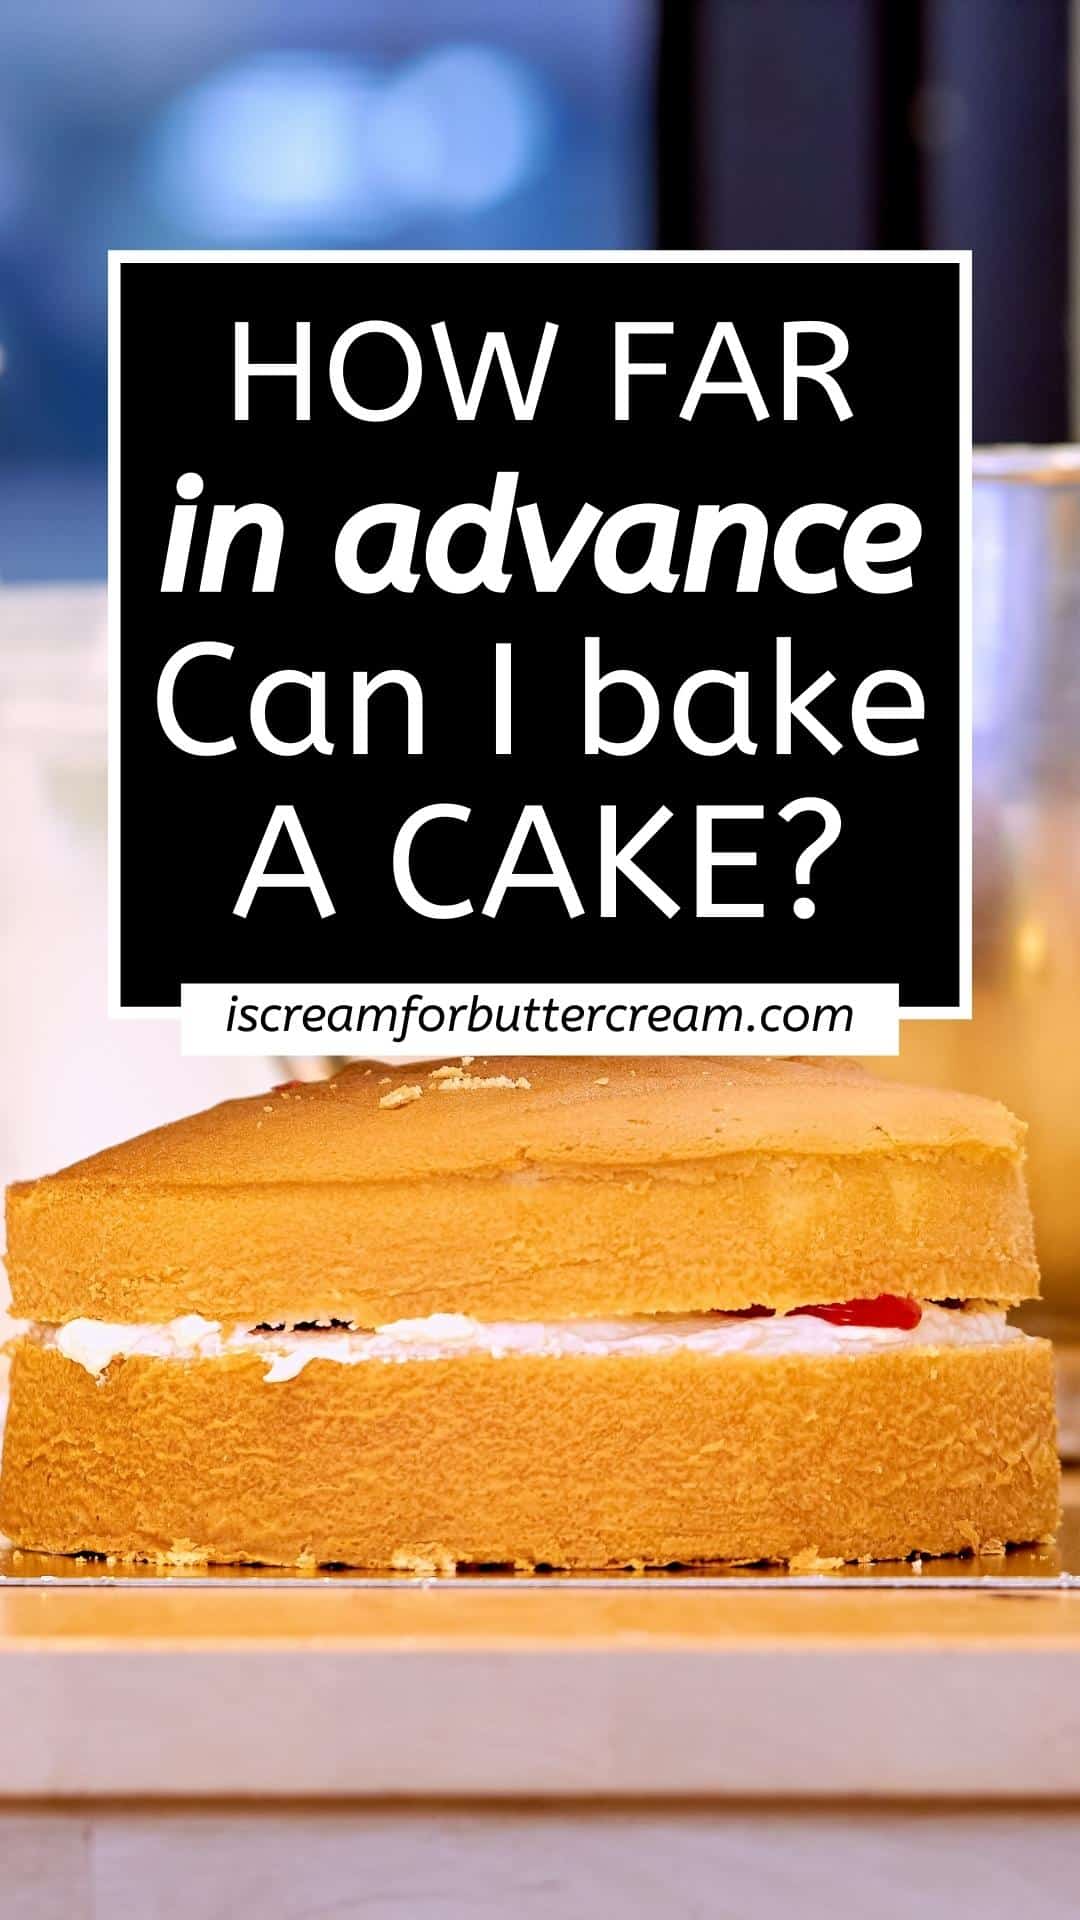 Vanilla cake layers with cream as filling with text overlay.